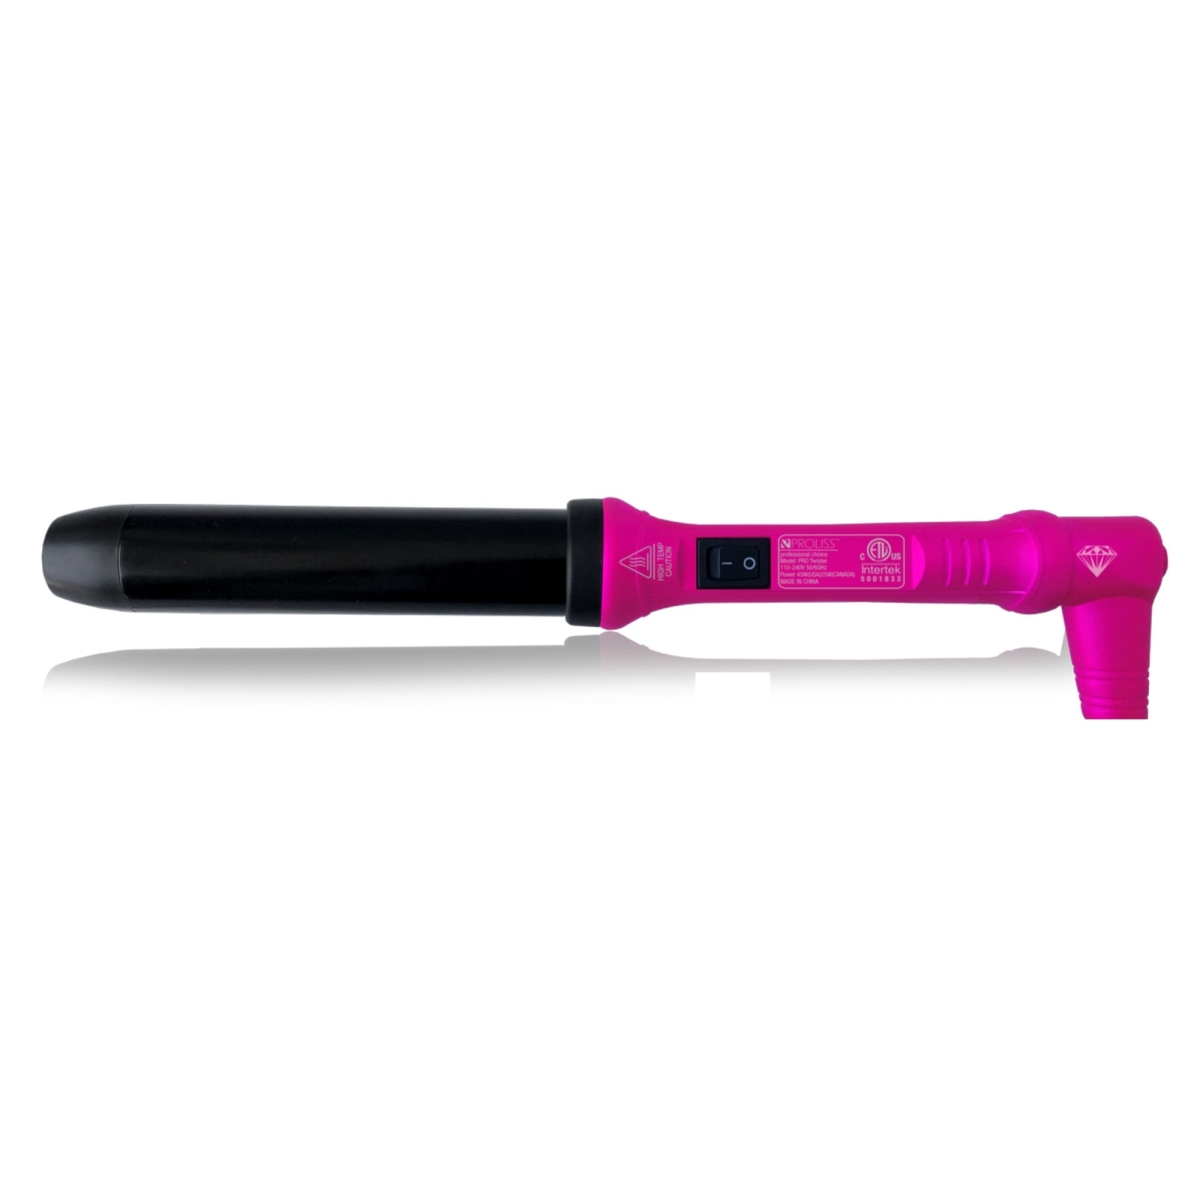 Picture of Proliss PRODCTWPNK32-117DC The Twister - 32mm Digital Tourmaline-Infused Ceramic Pro Curling Wand w/ Cool Tip - Diamond Collection - Metallic Pink